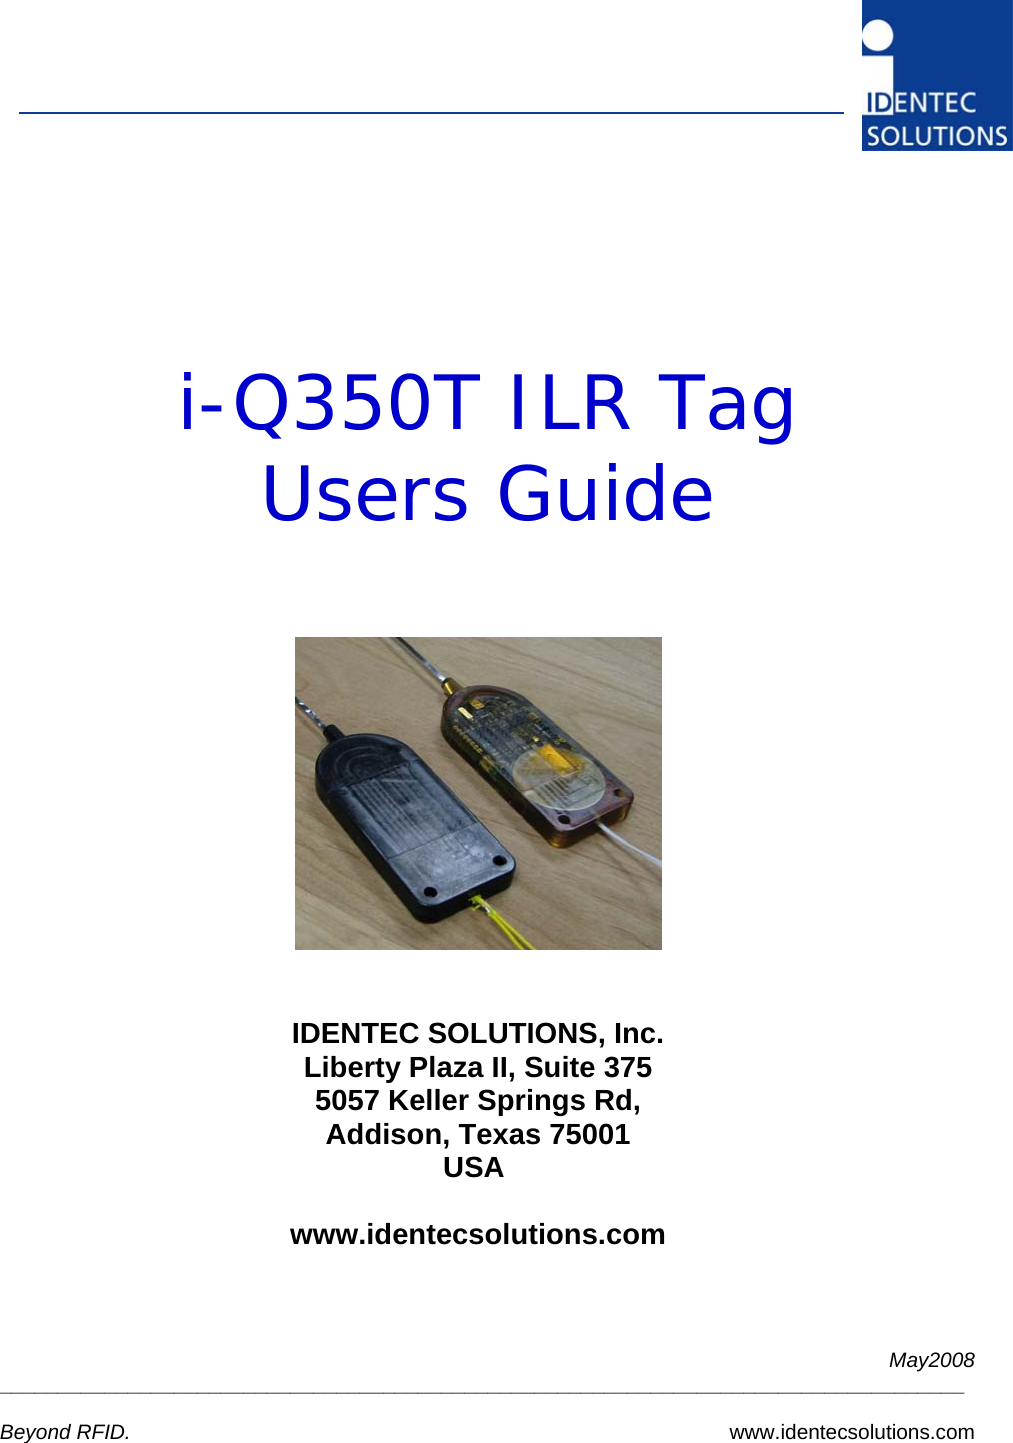  May2008 ___________________________________________________________________________________   Beyond RFID. www.identecsolutions.com           i-Q350T ILR Tag Users Guide       IDENTEC SOLUTIONS, Inc. Liberty Plaza II, Suite 375 5057 Keller Springs Rd,  Addison, Texas 75001 USA   www.identecsolutions.com   